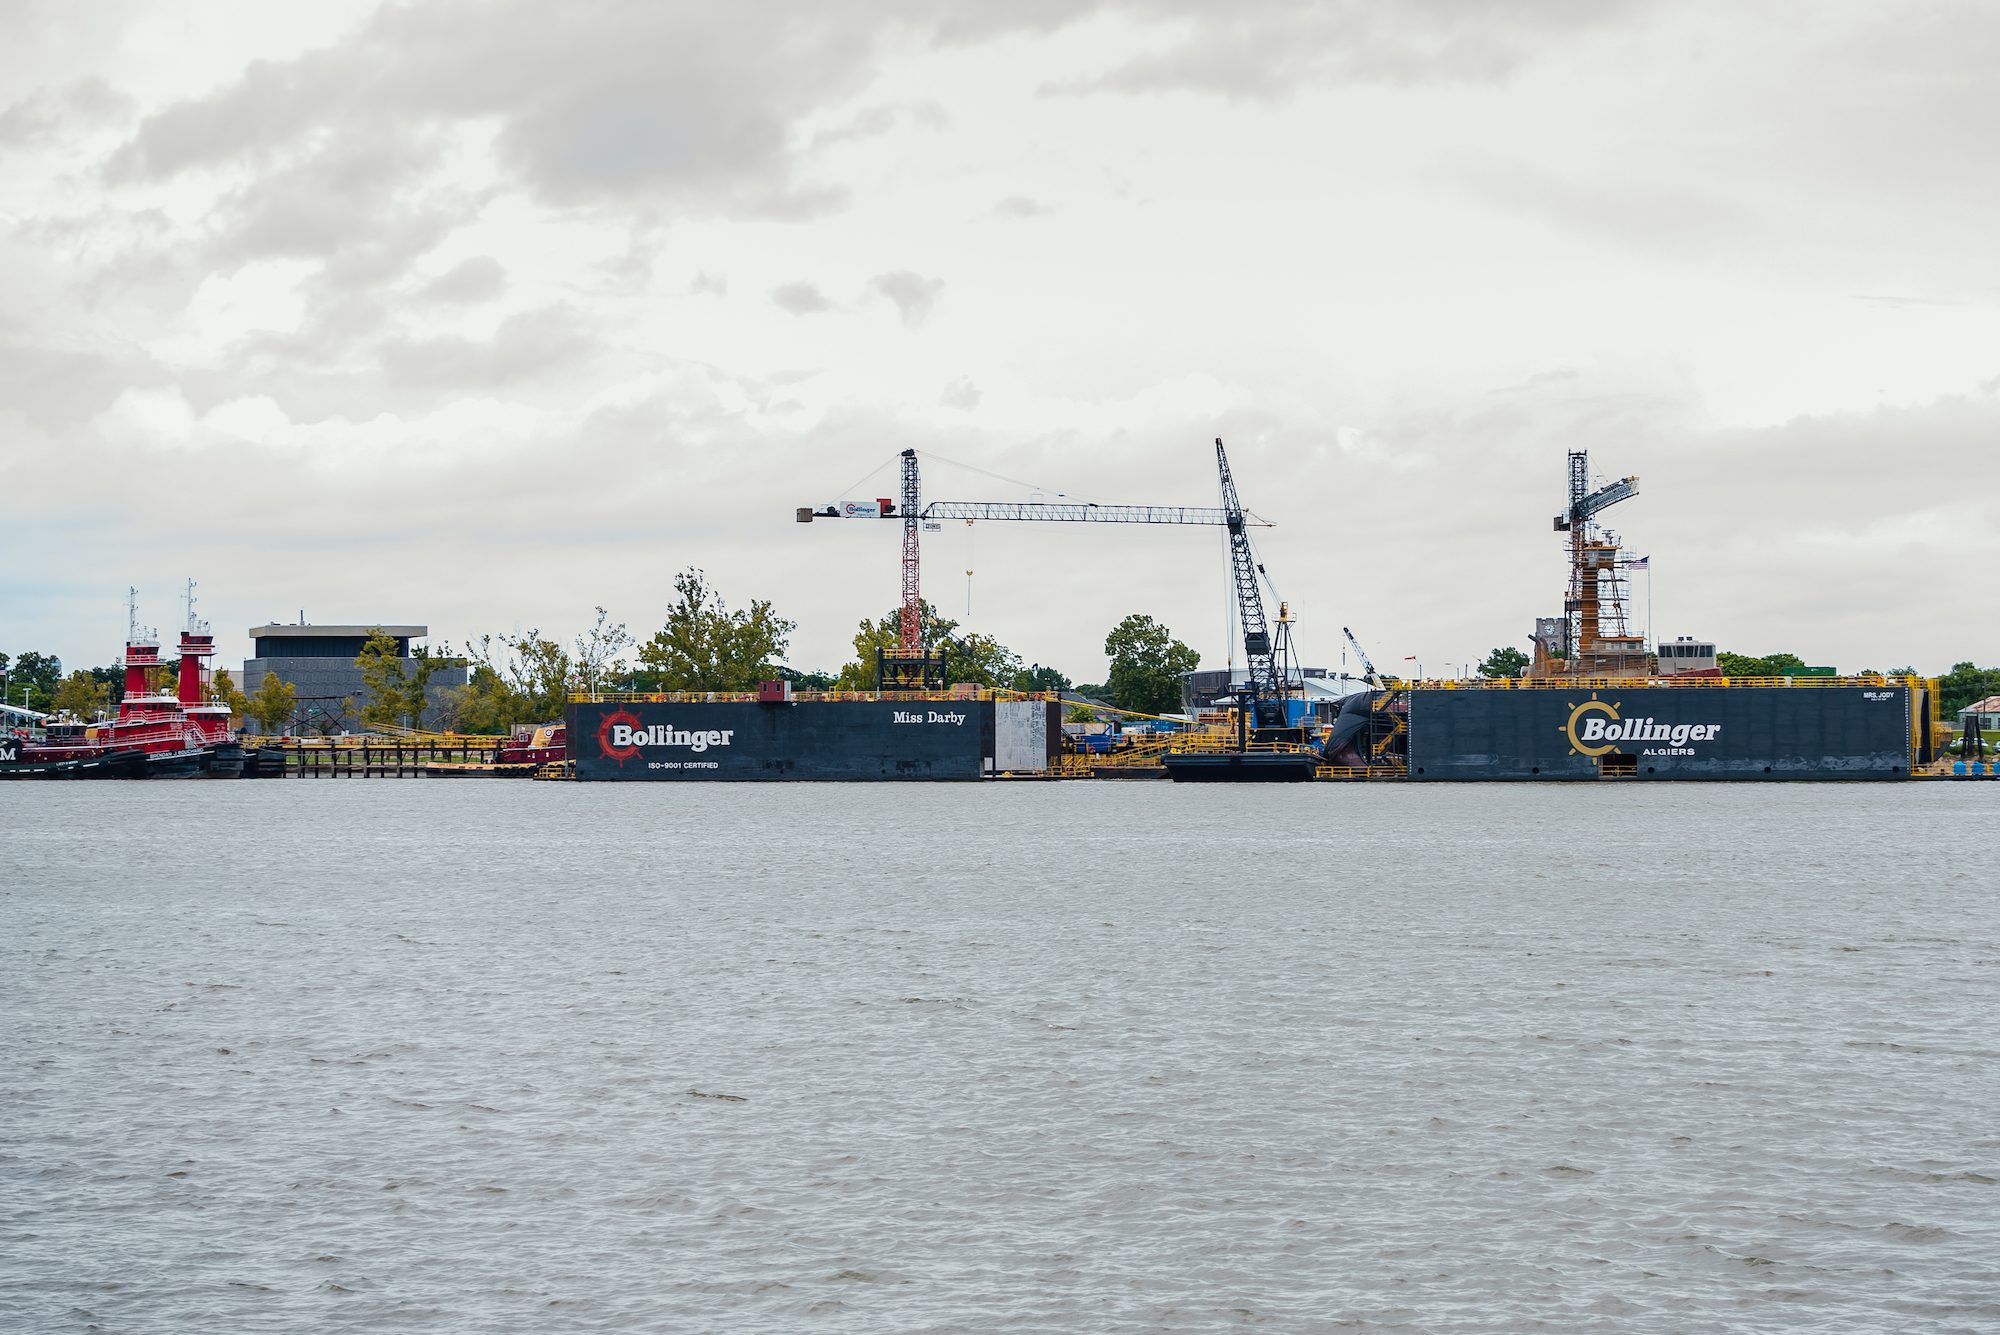 Bollinger Algiers ship repair facility pictured from New Orleans on August 19, 2019